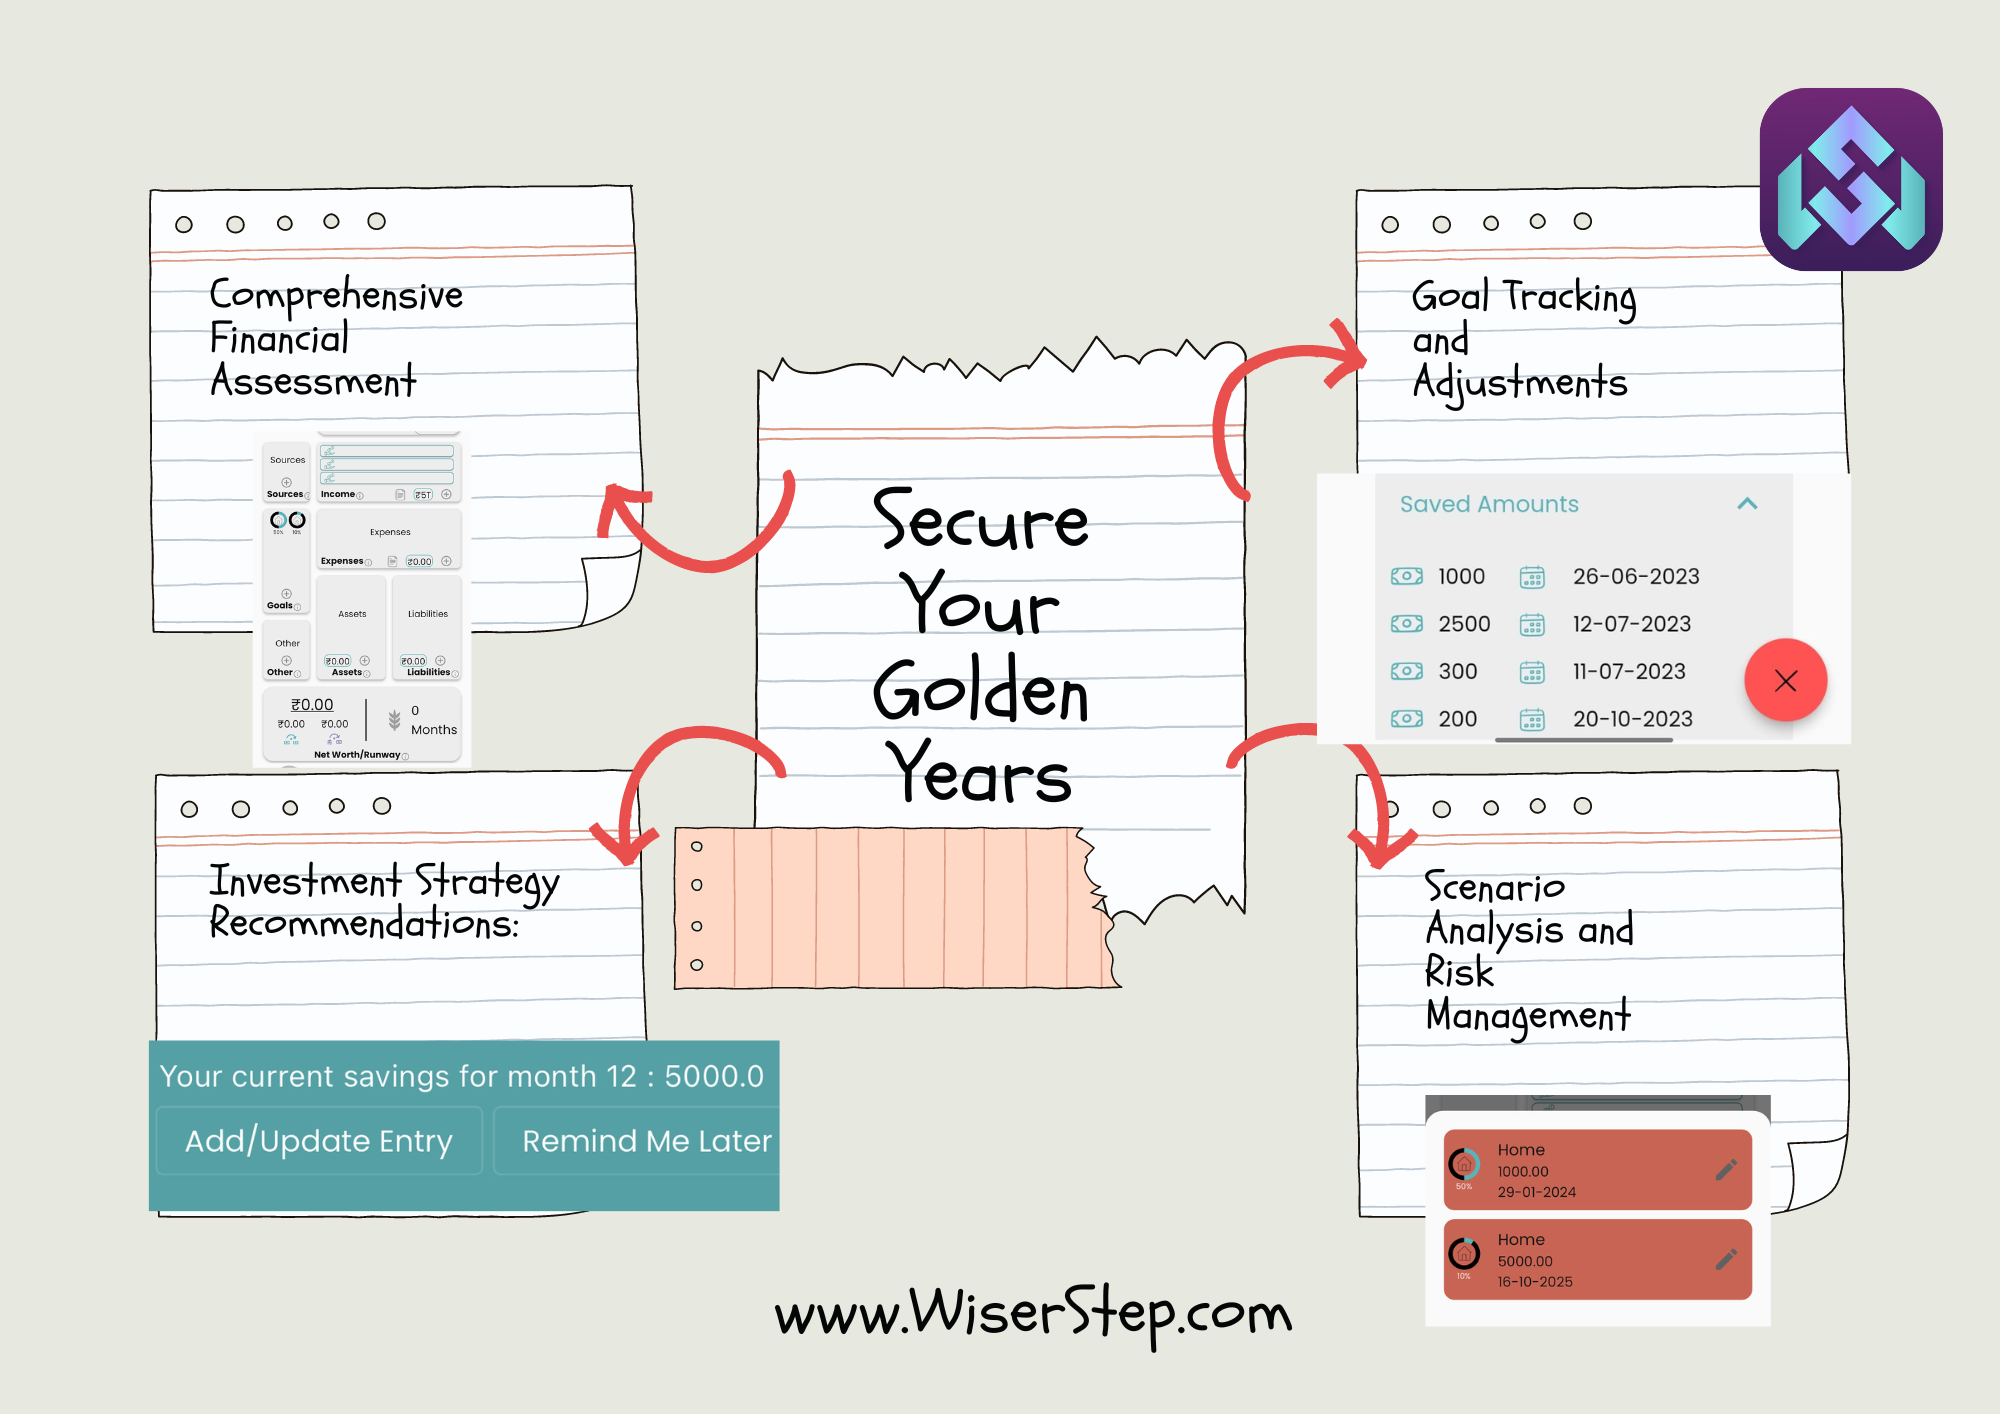 Secure Your Golden Years: How WiserStep and Finance Apps Simplify Retirement Income Planning